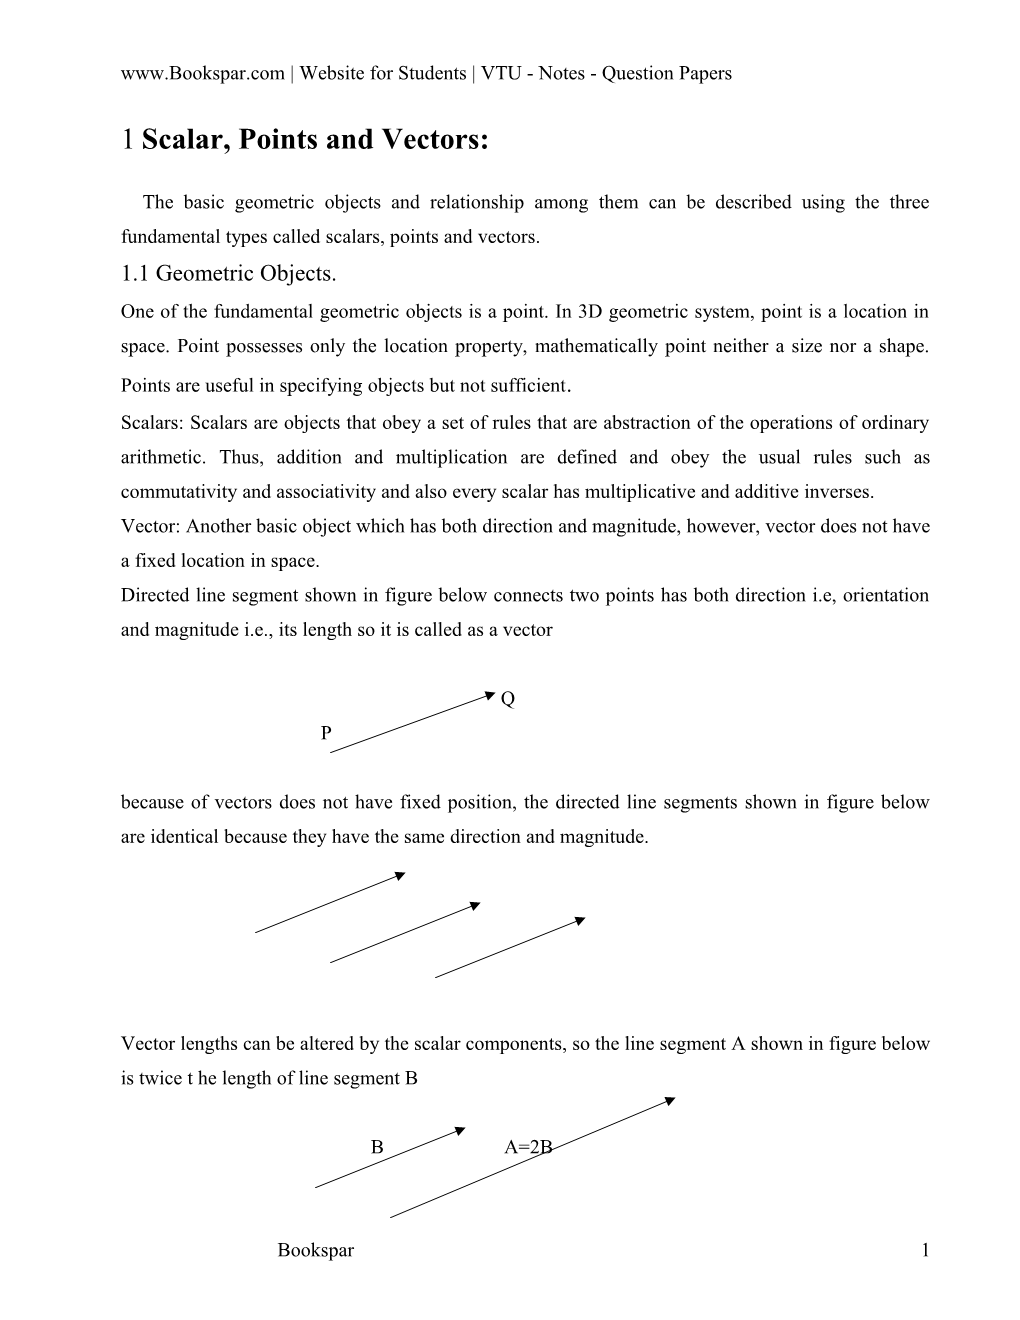 Scalars, Points and Vectors